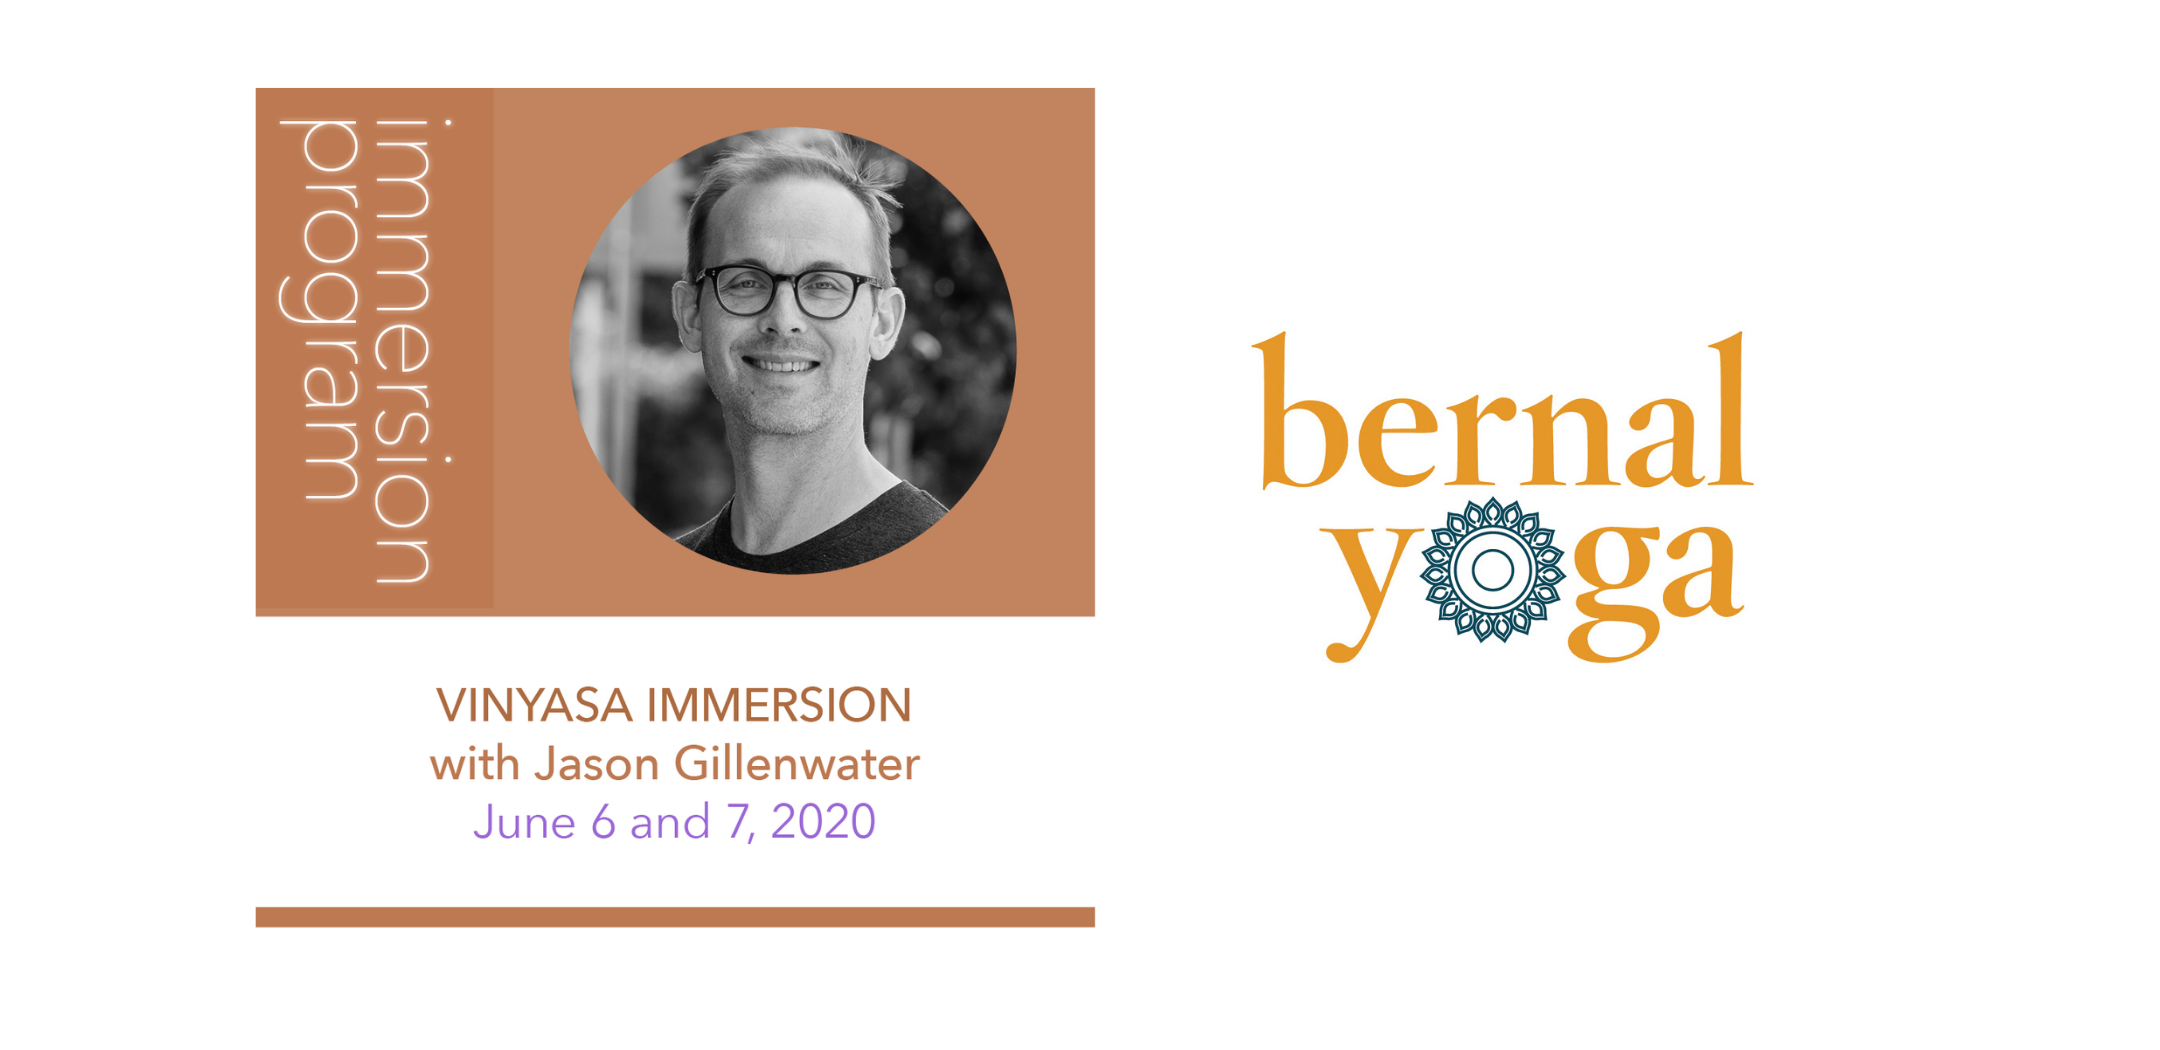 Vinyasa Immersion with Jason Gillenwater